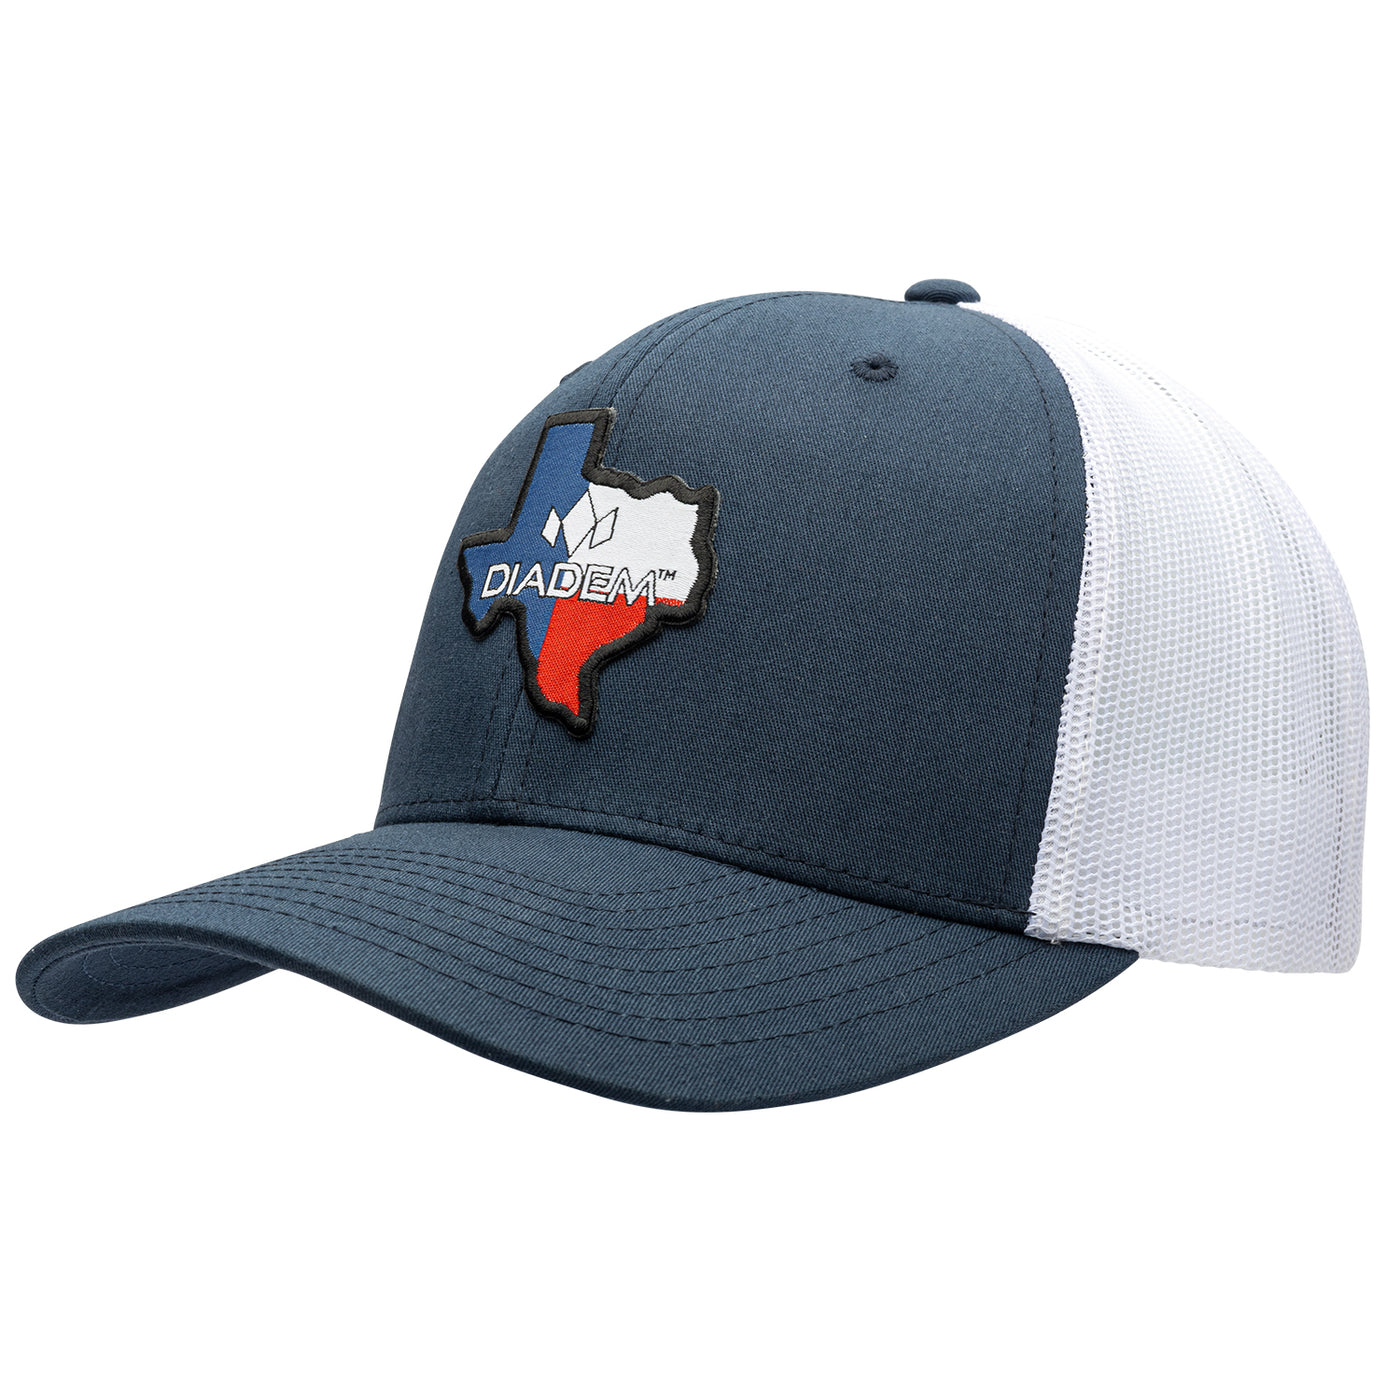 Texas Patch Hat